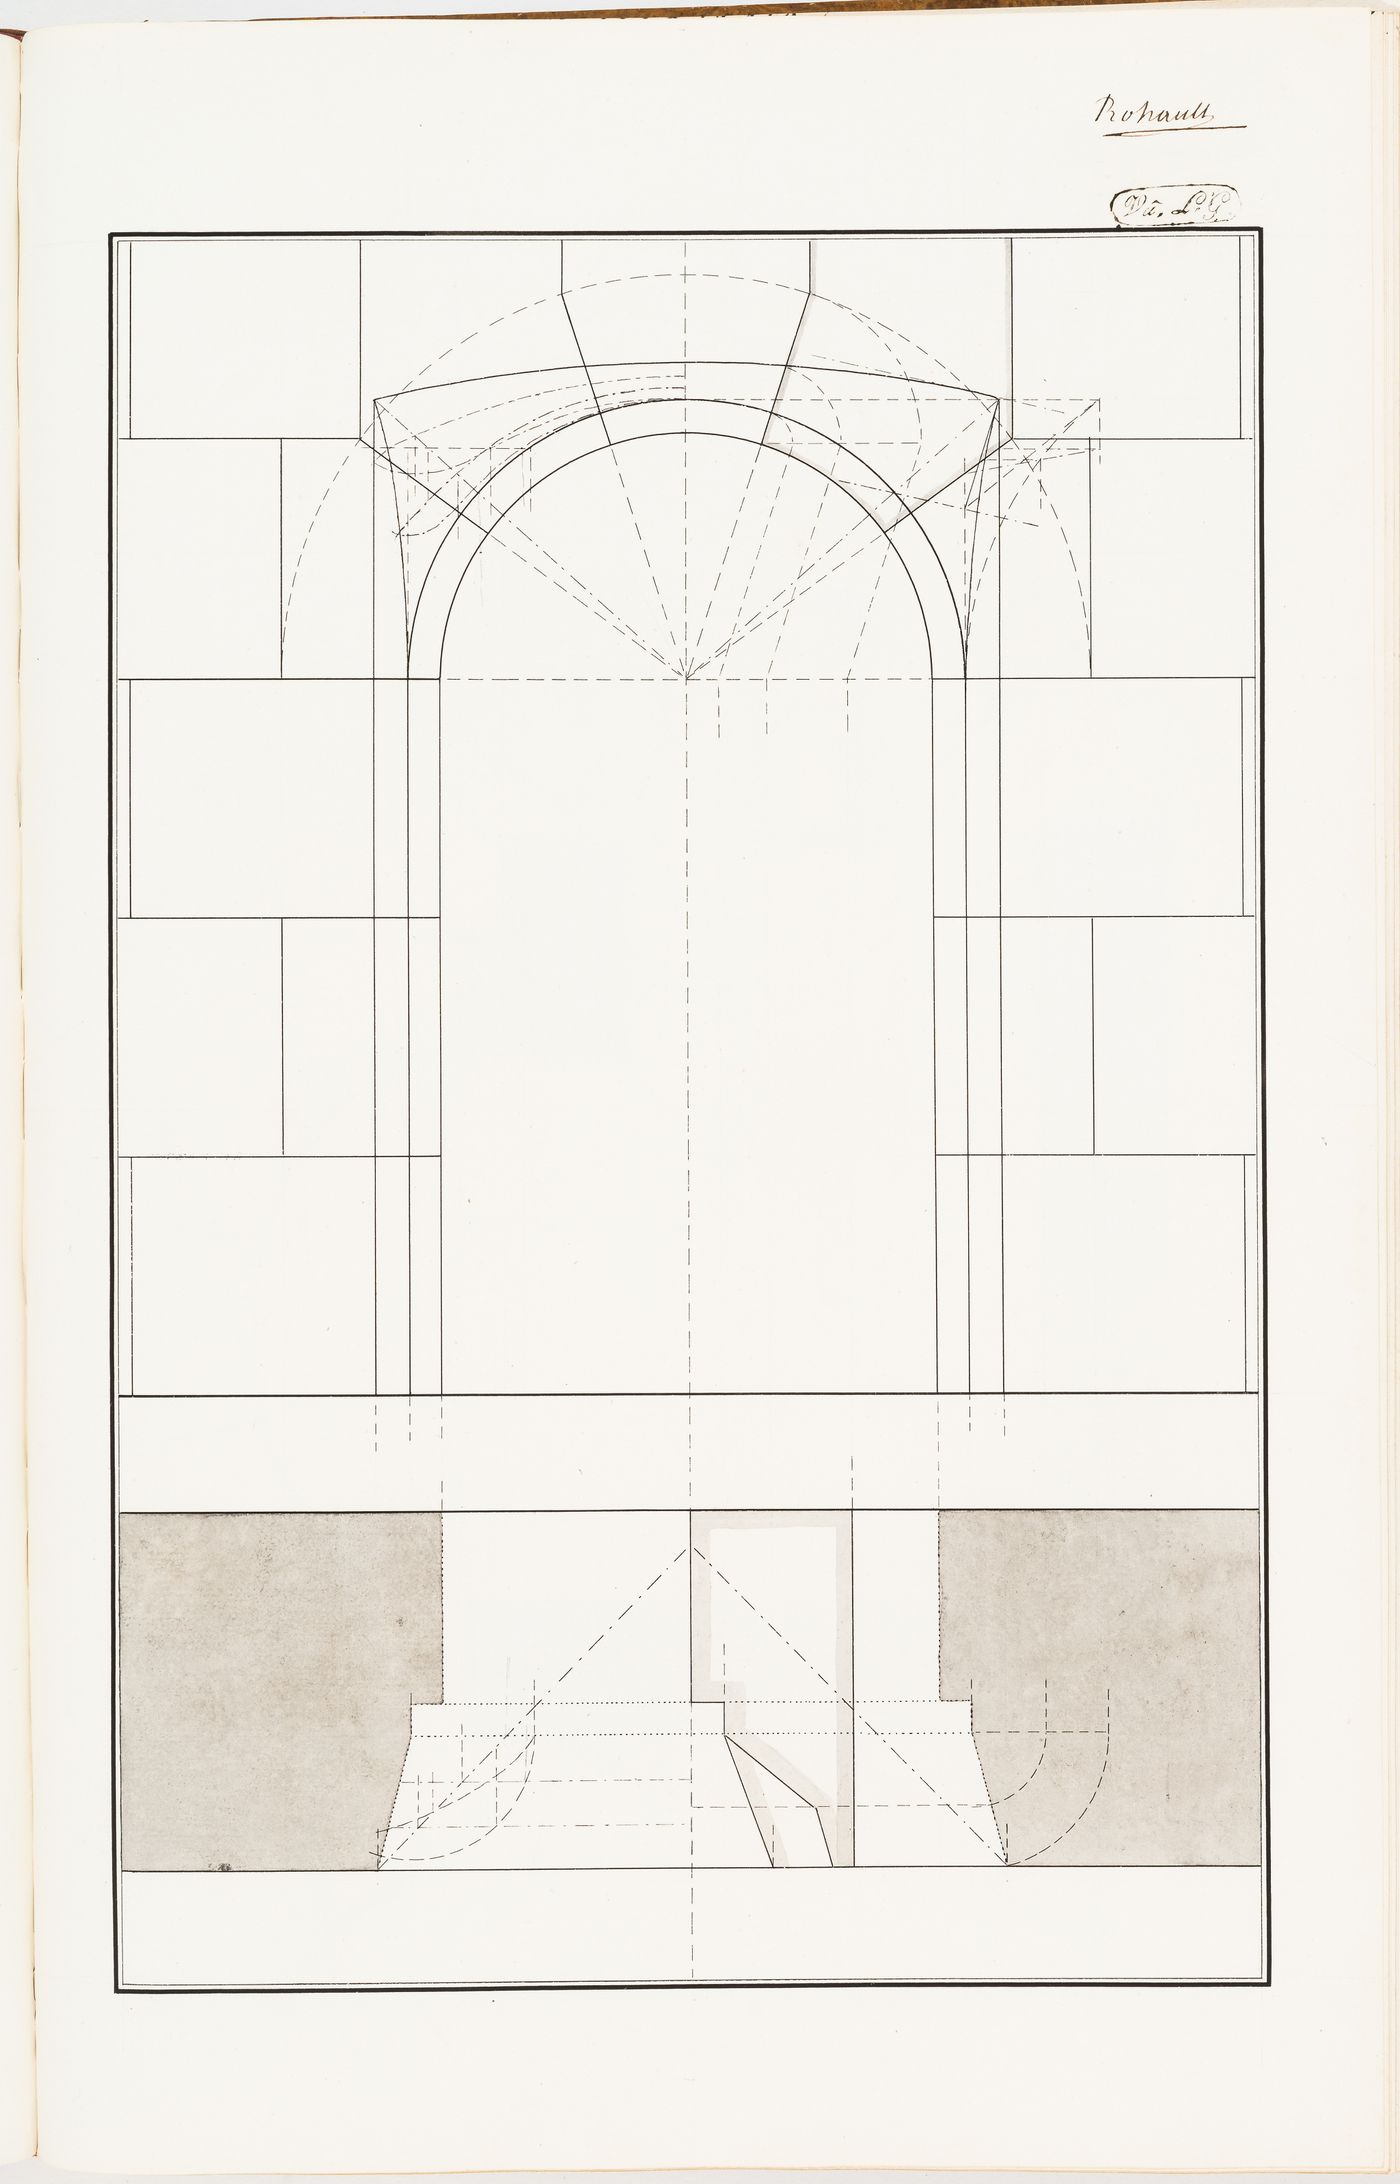 Geometry exercise for the construction of an arched doorway